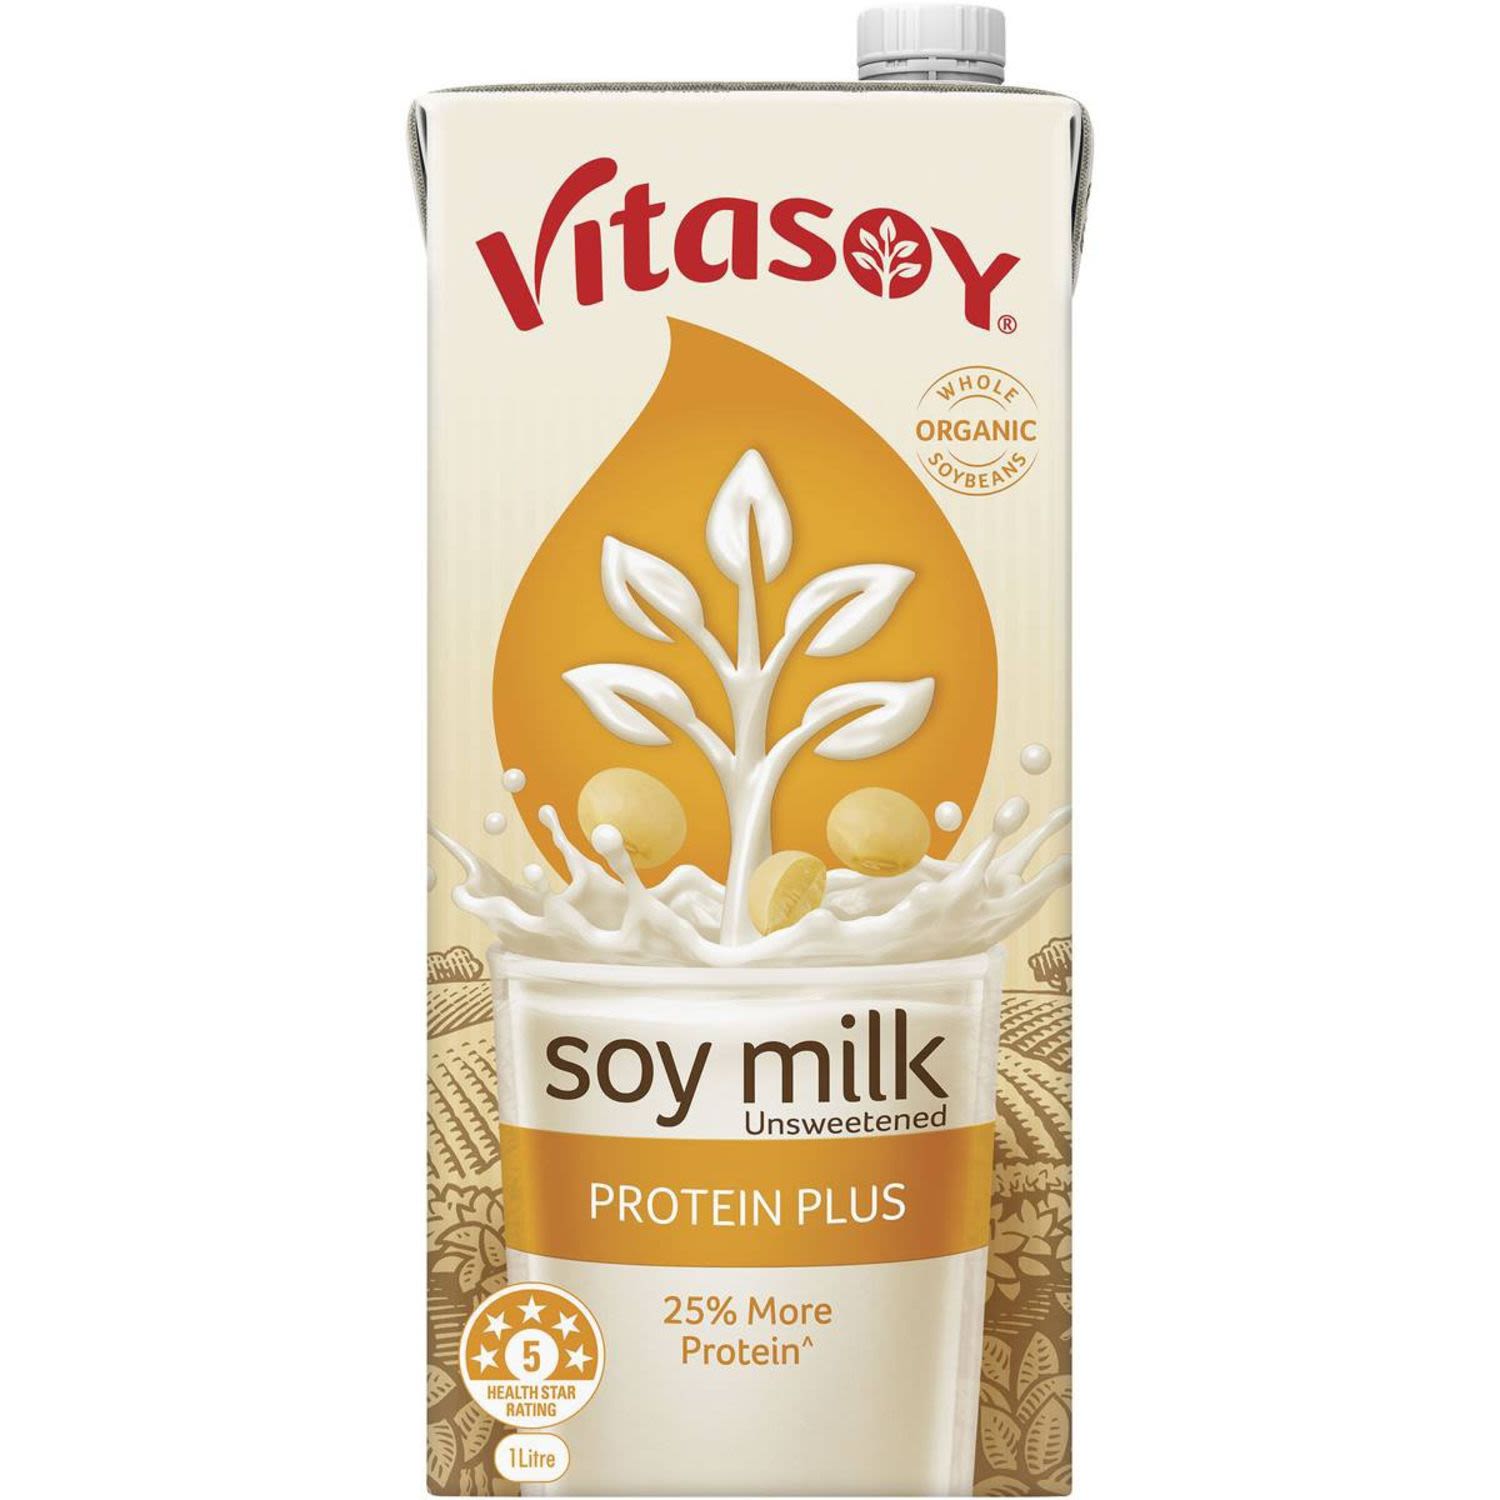 Vitasoy Unsweetened Protein Plus Soy Milk, 1 Litre